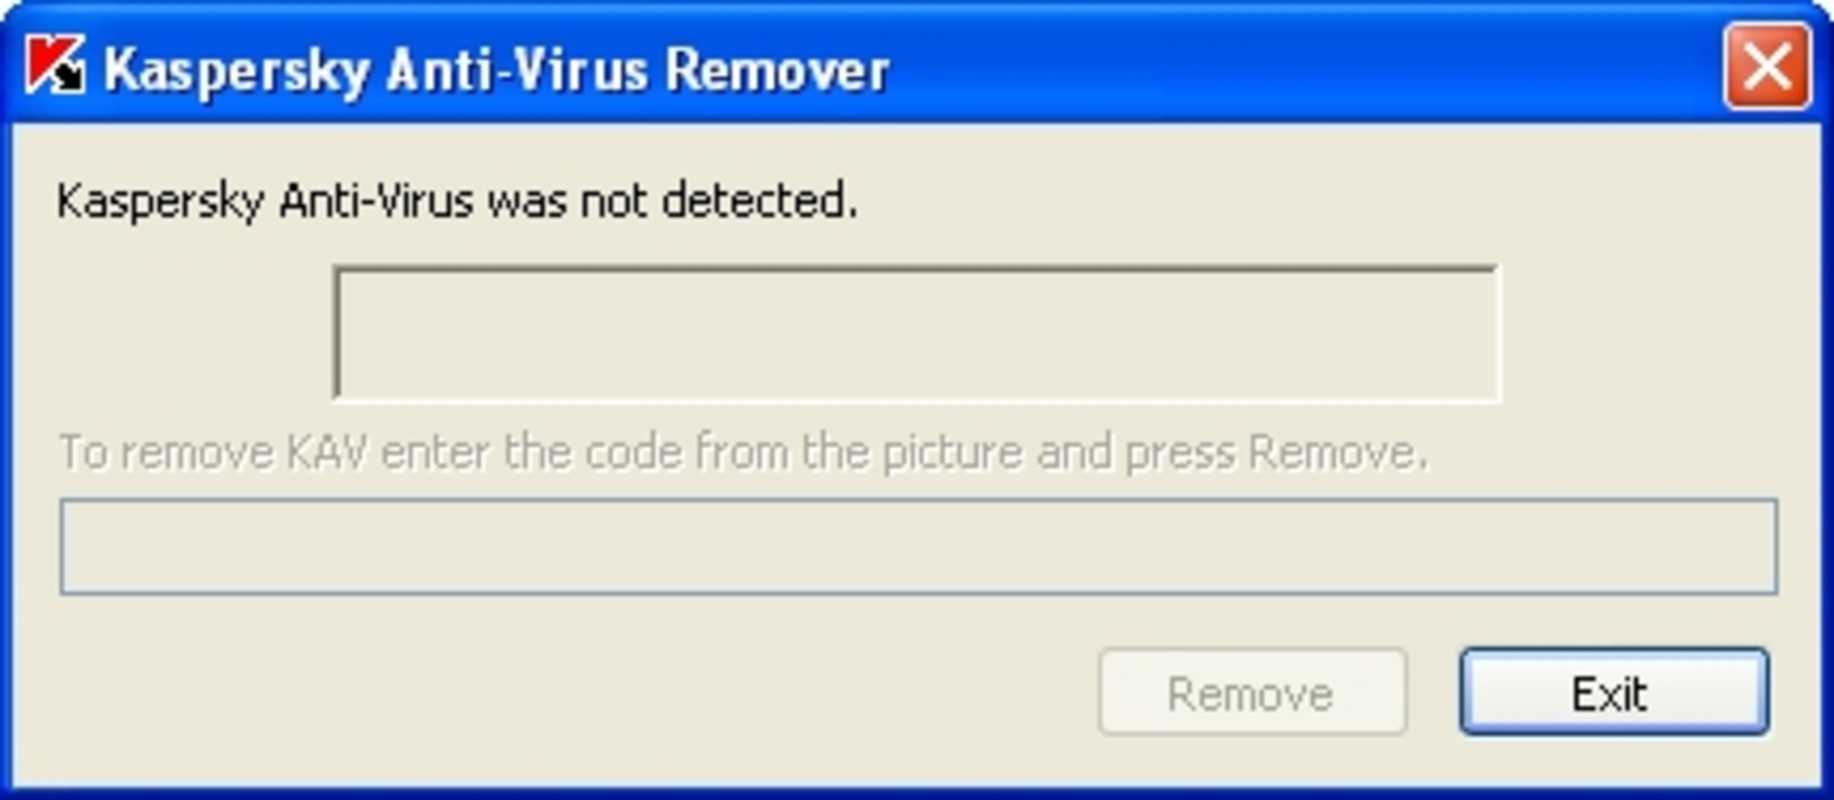 Removal tool for Kaspersky (kavremover) 1.0.3666.0 feature